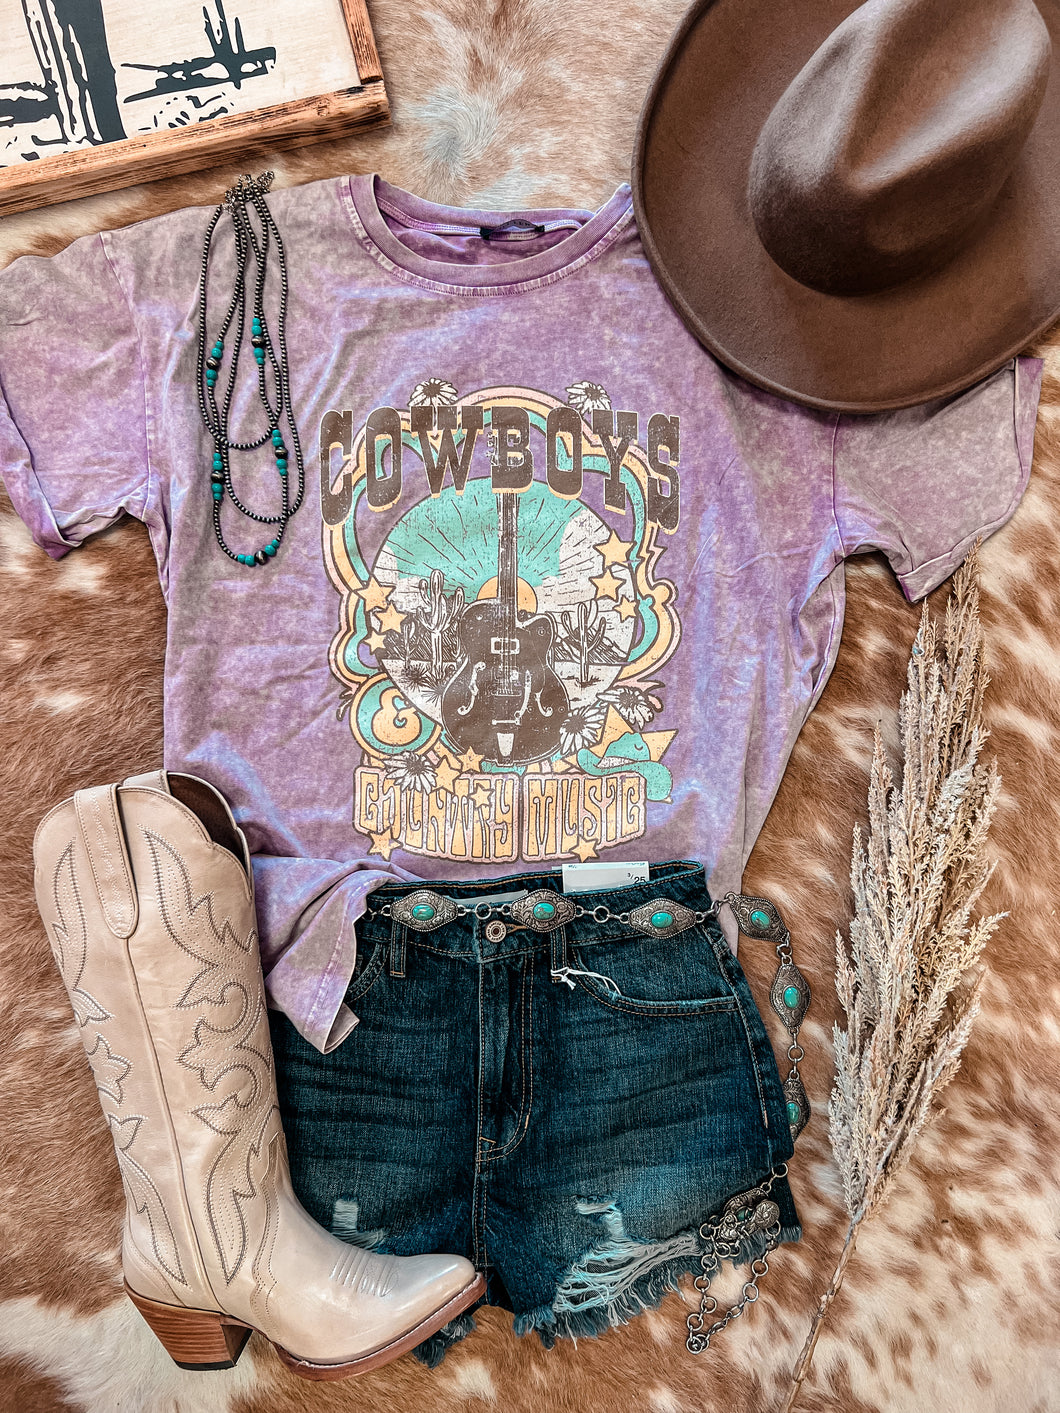 Cowboys & Country Music Mineral Wash Tee (Lavender)